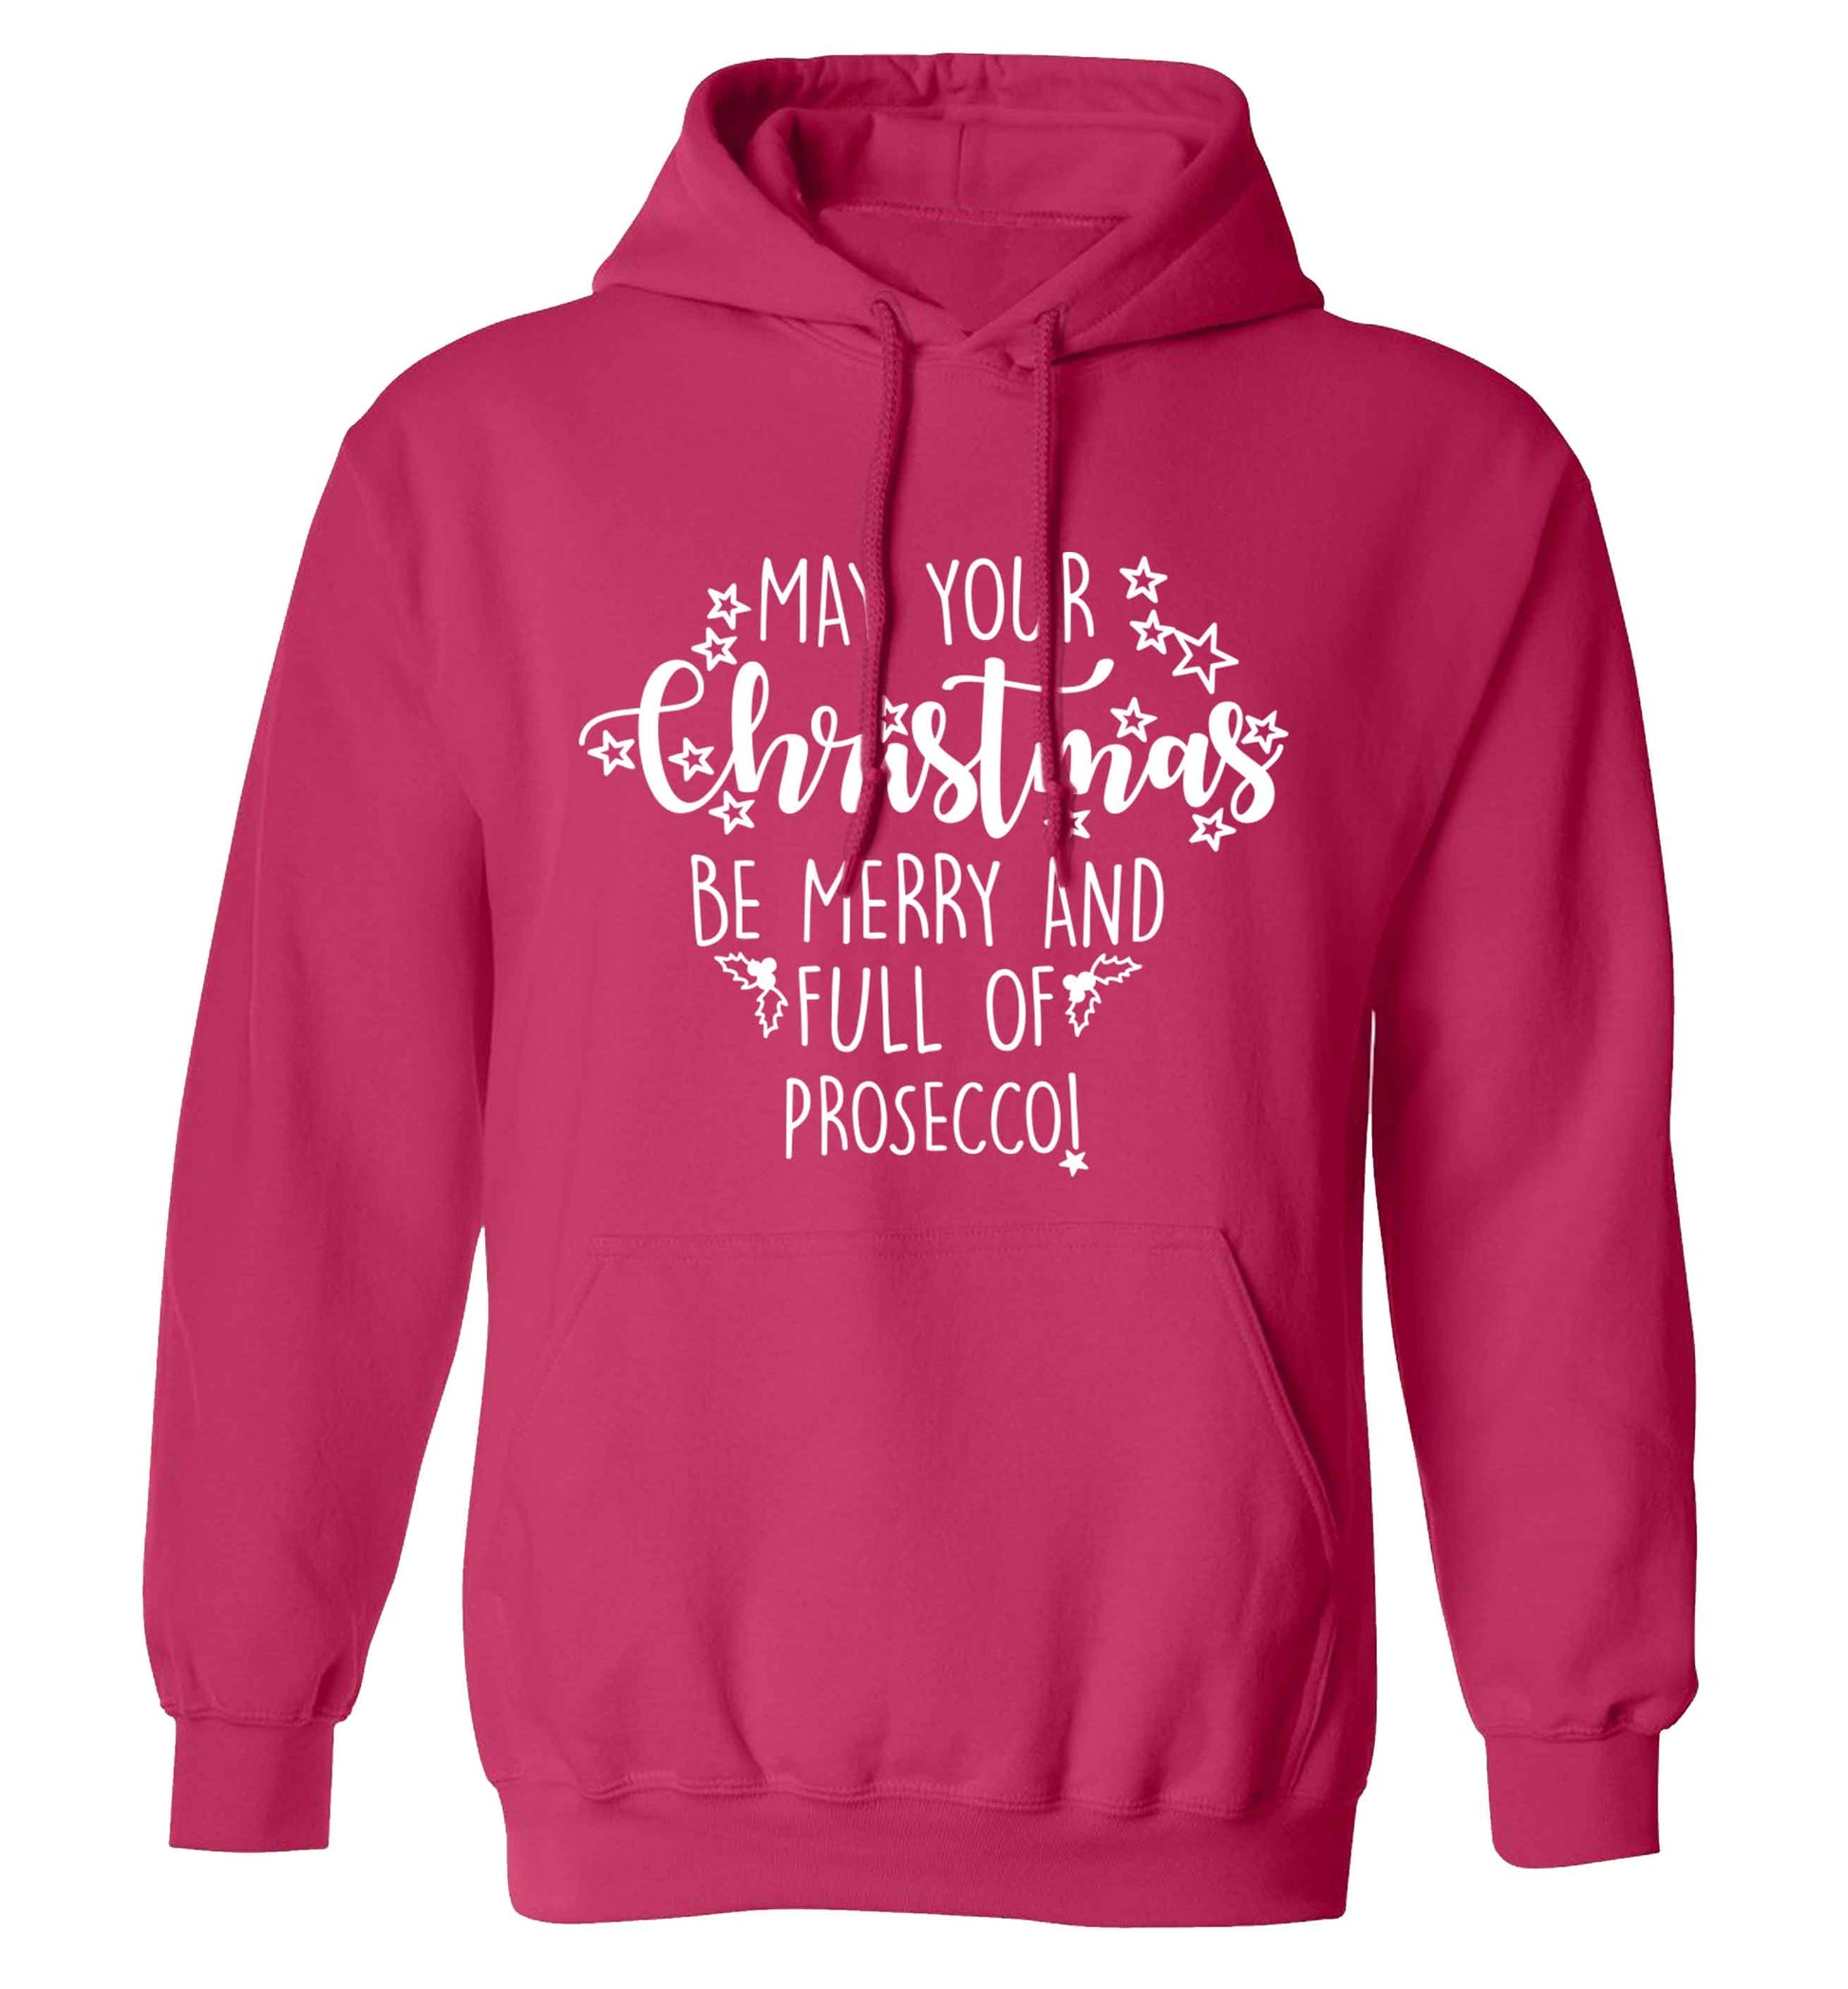 May your Christmas be merry and full of prosecco adults unisex pink hoodie 2XL